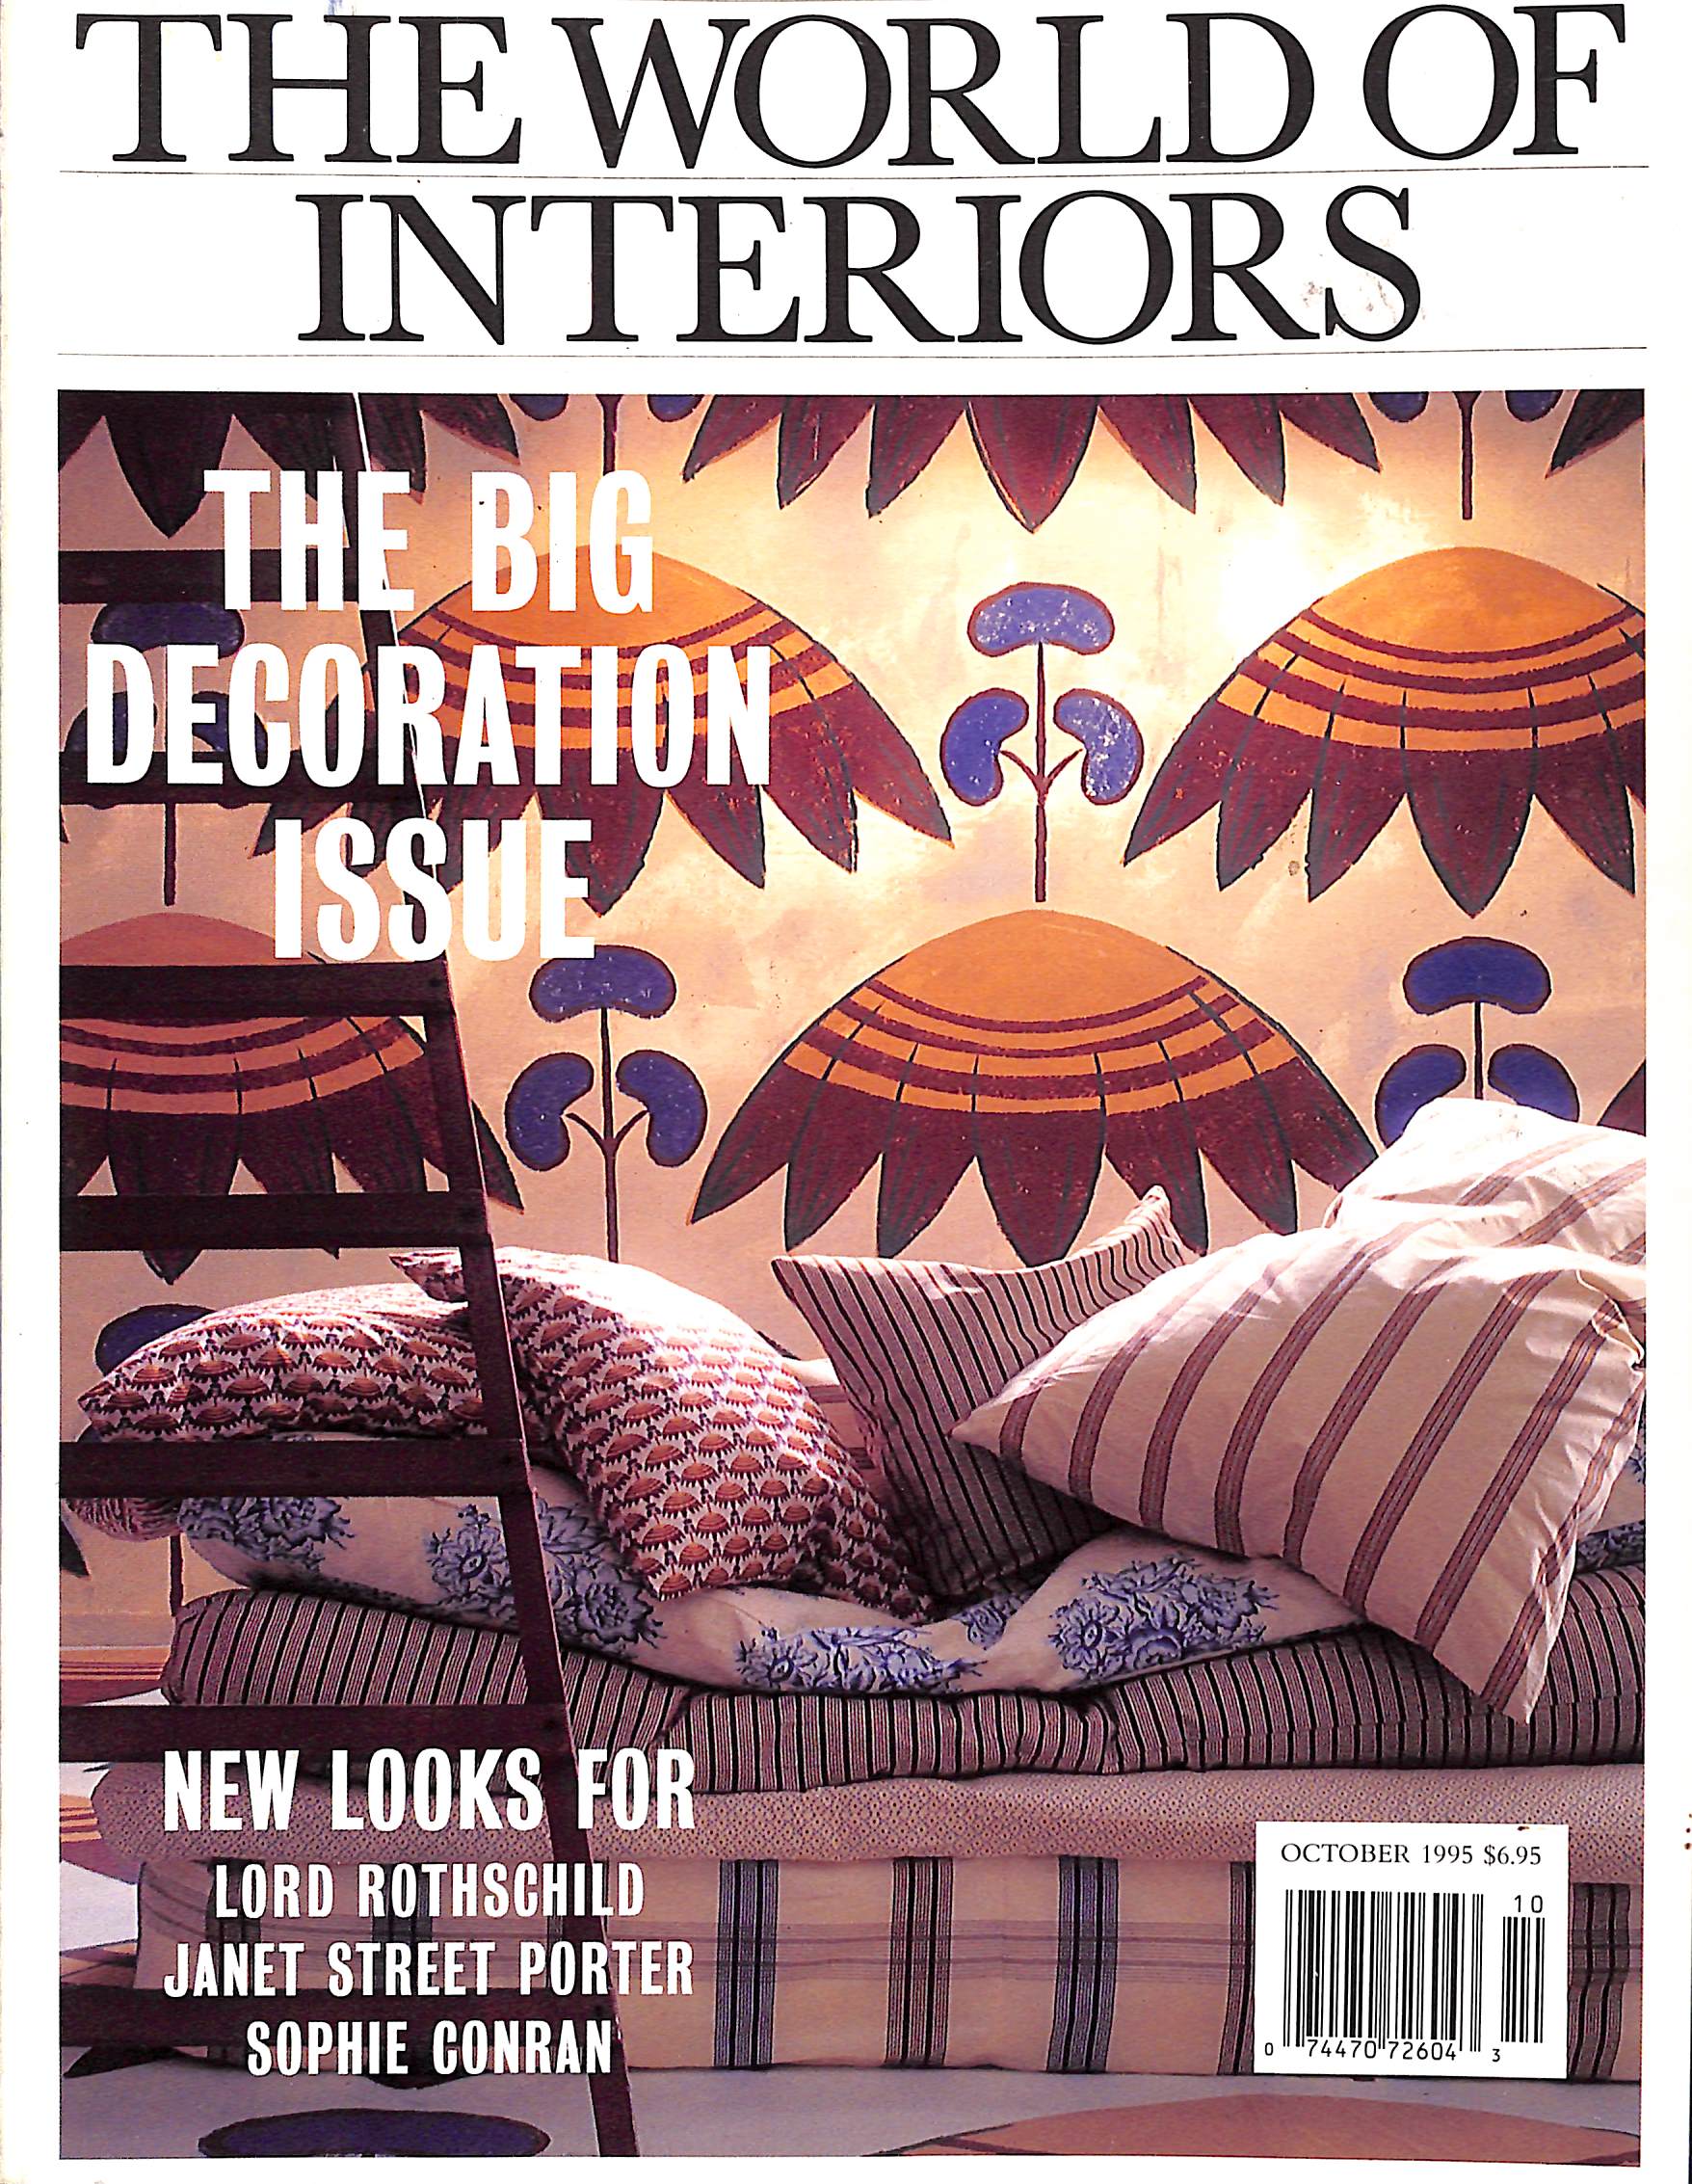 The Big Decoration Issue October 1995